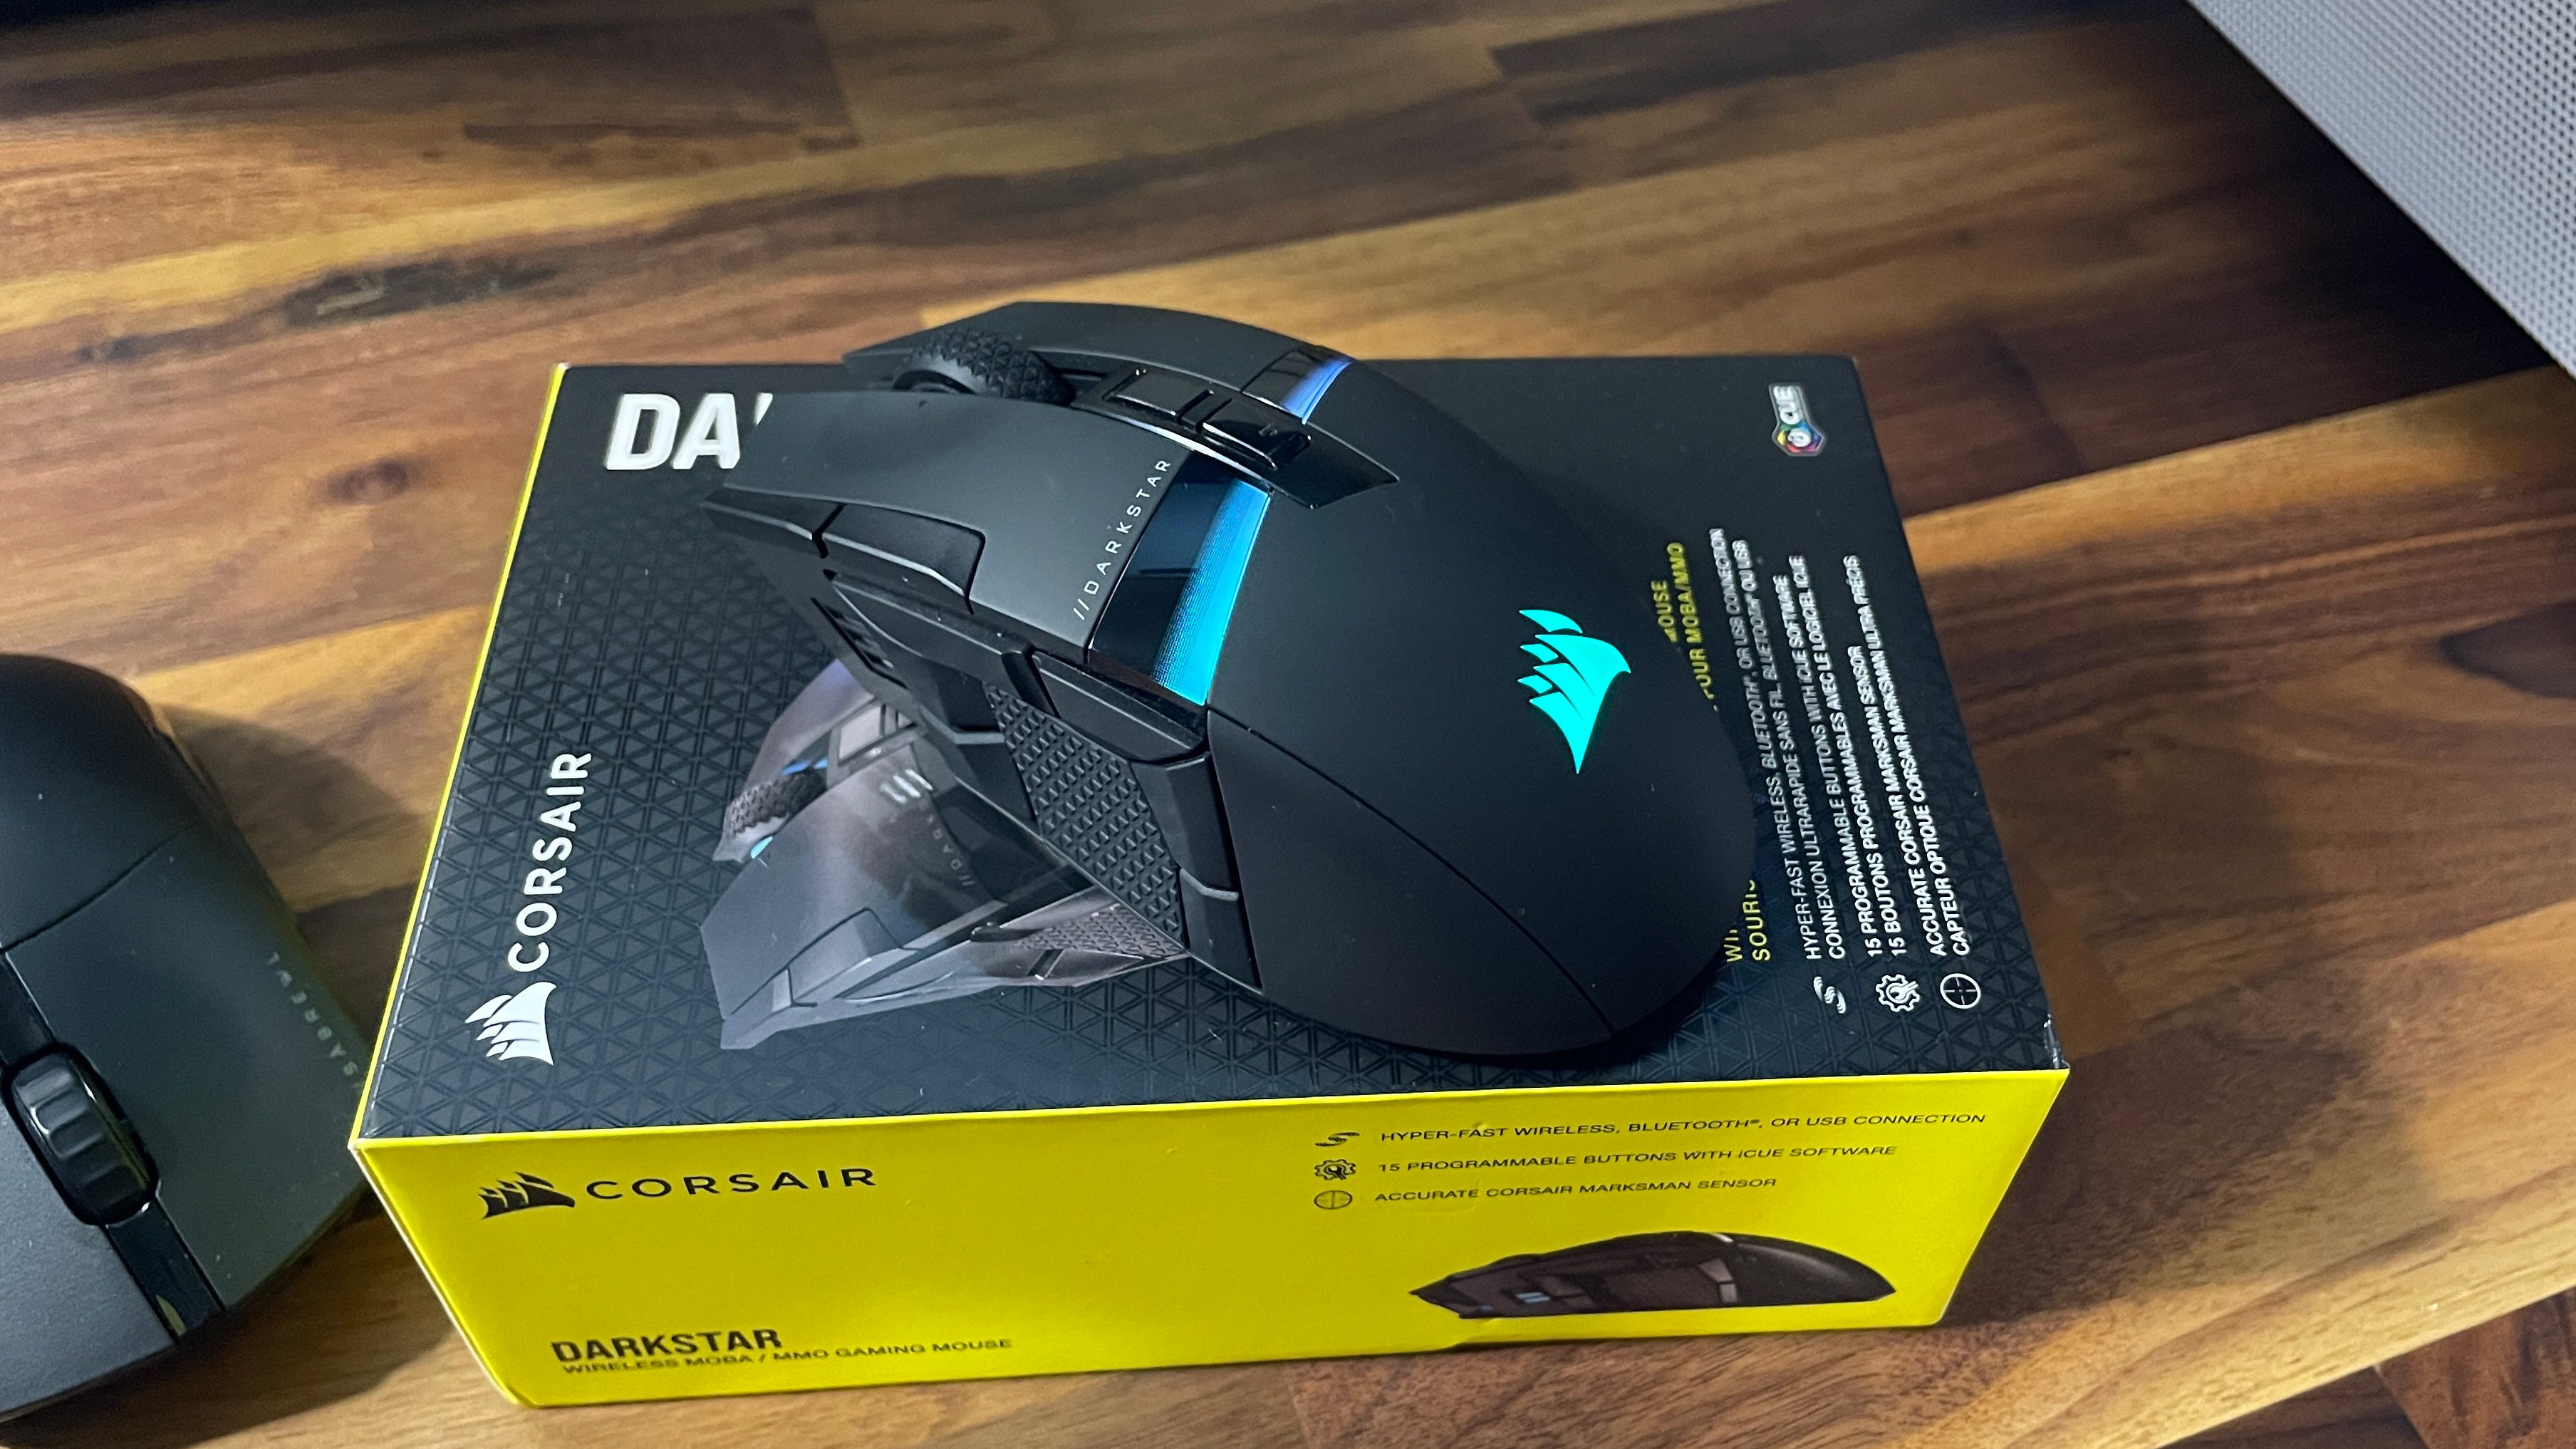 The 4 Best Corsair Mice of 2023: Mouse Reviews 